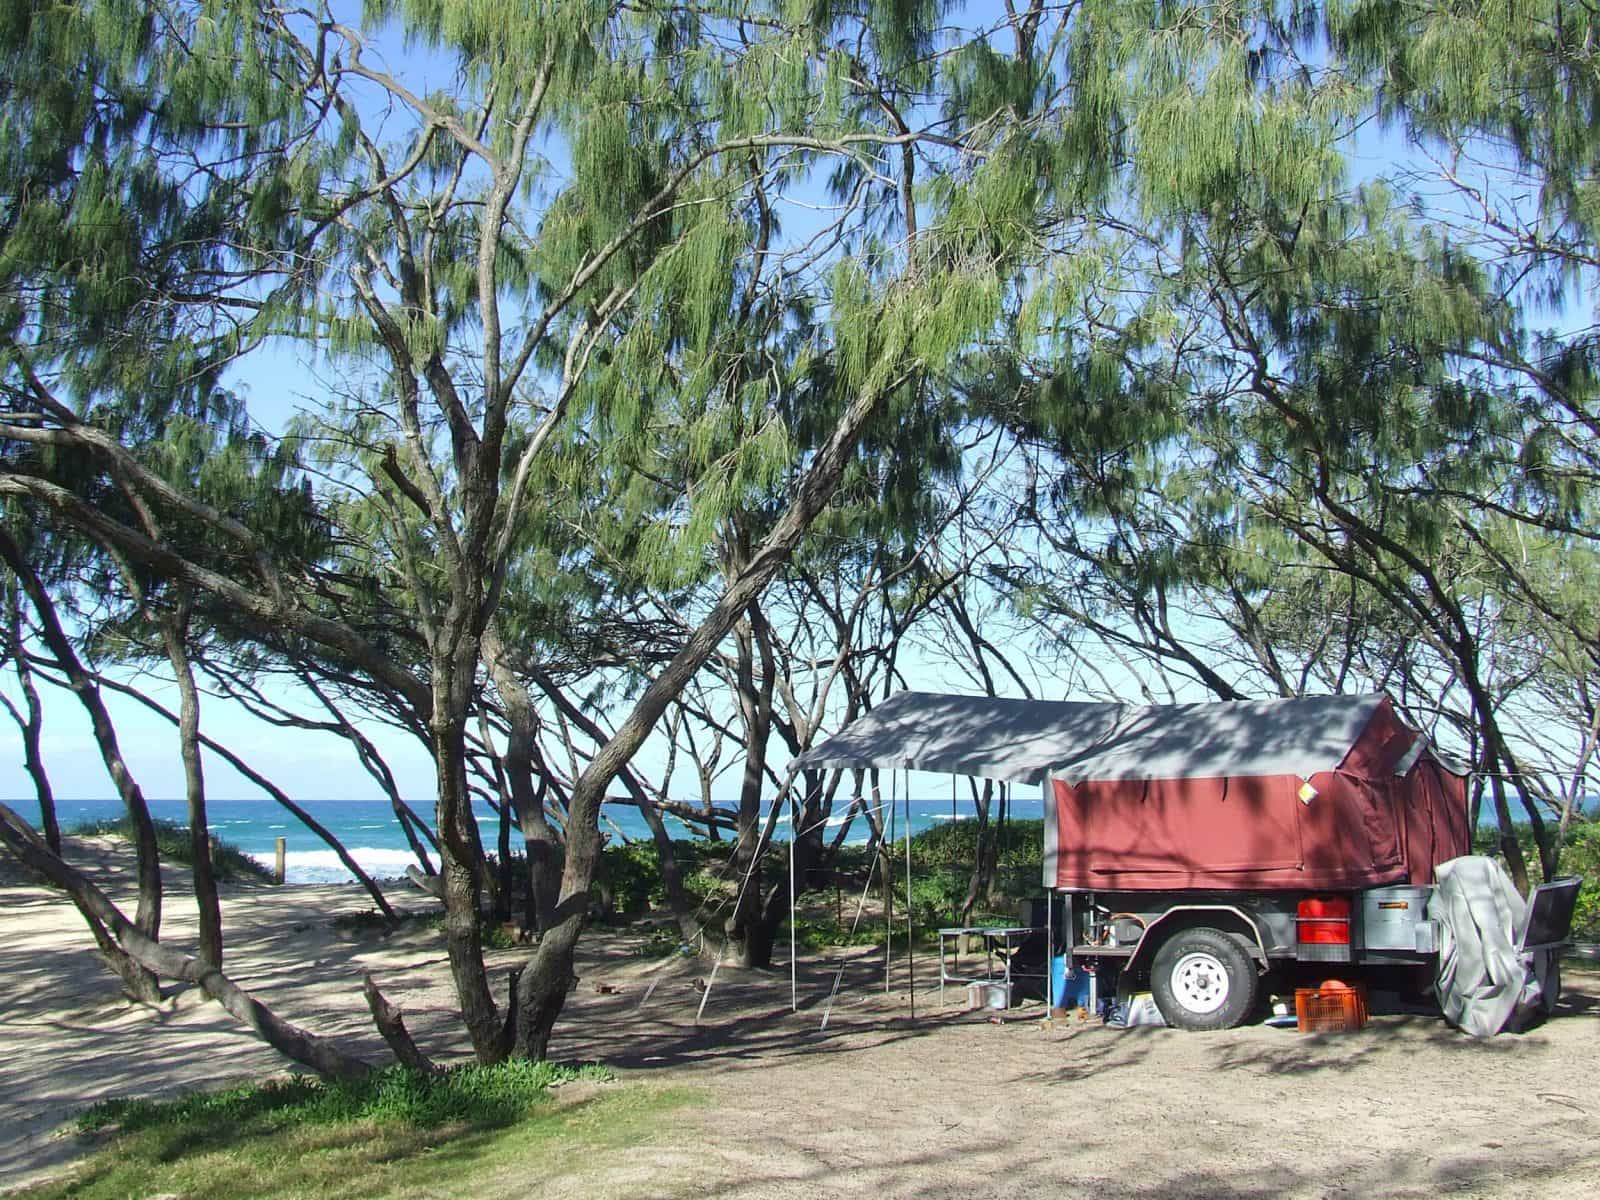 A red camper trailer is parked amongst the casuarinas behind the beach,